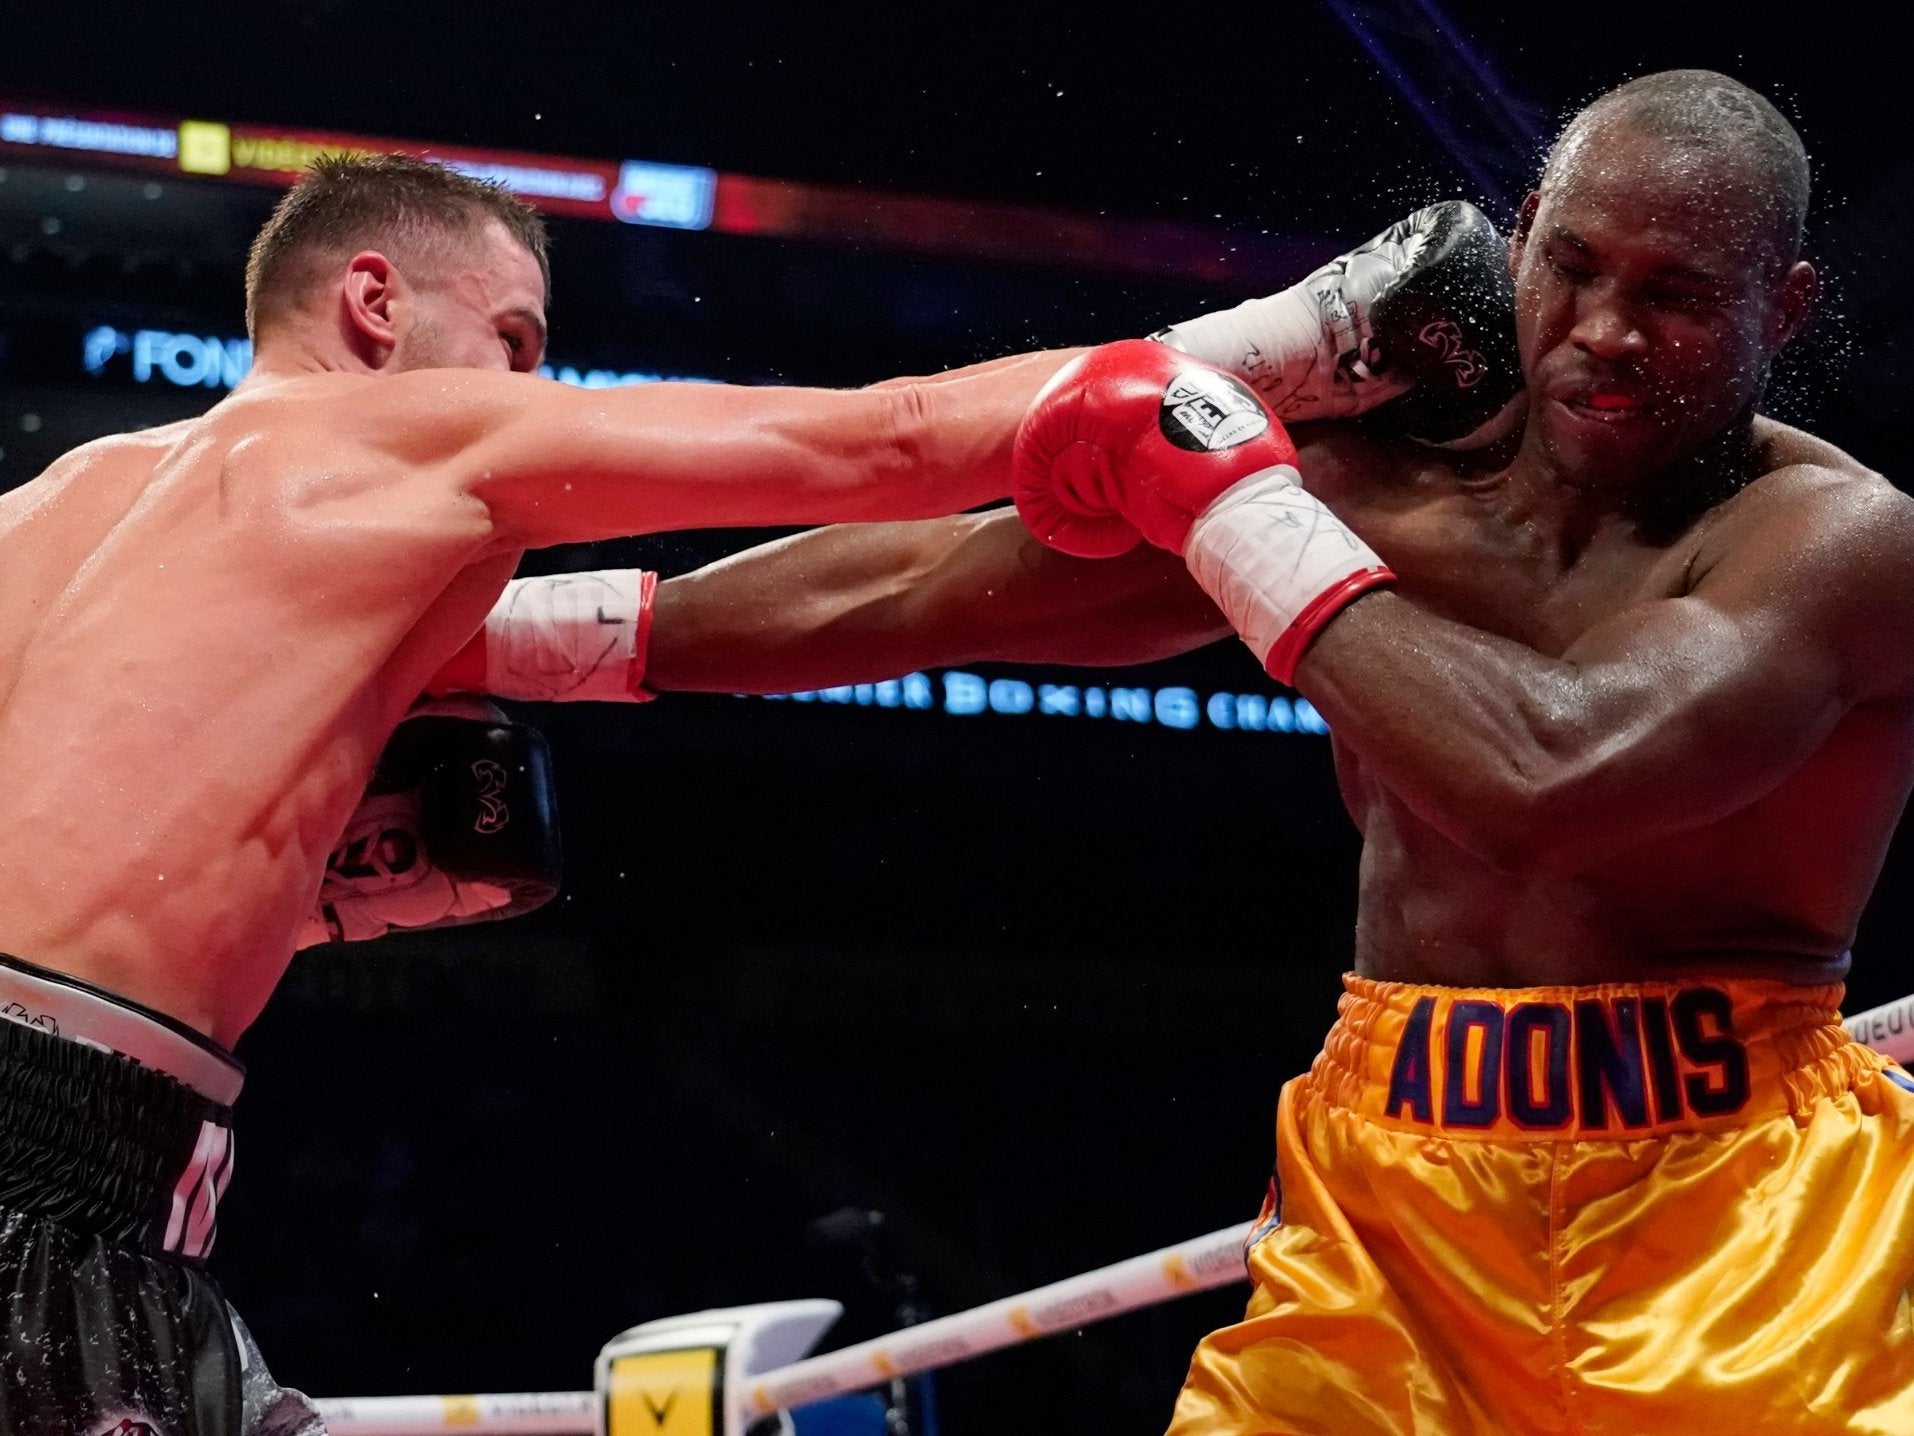 Gvozdyk caught Stevenson with a flurry of punches in the 11th round